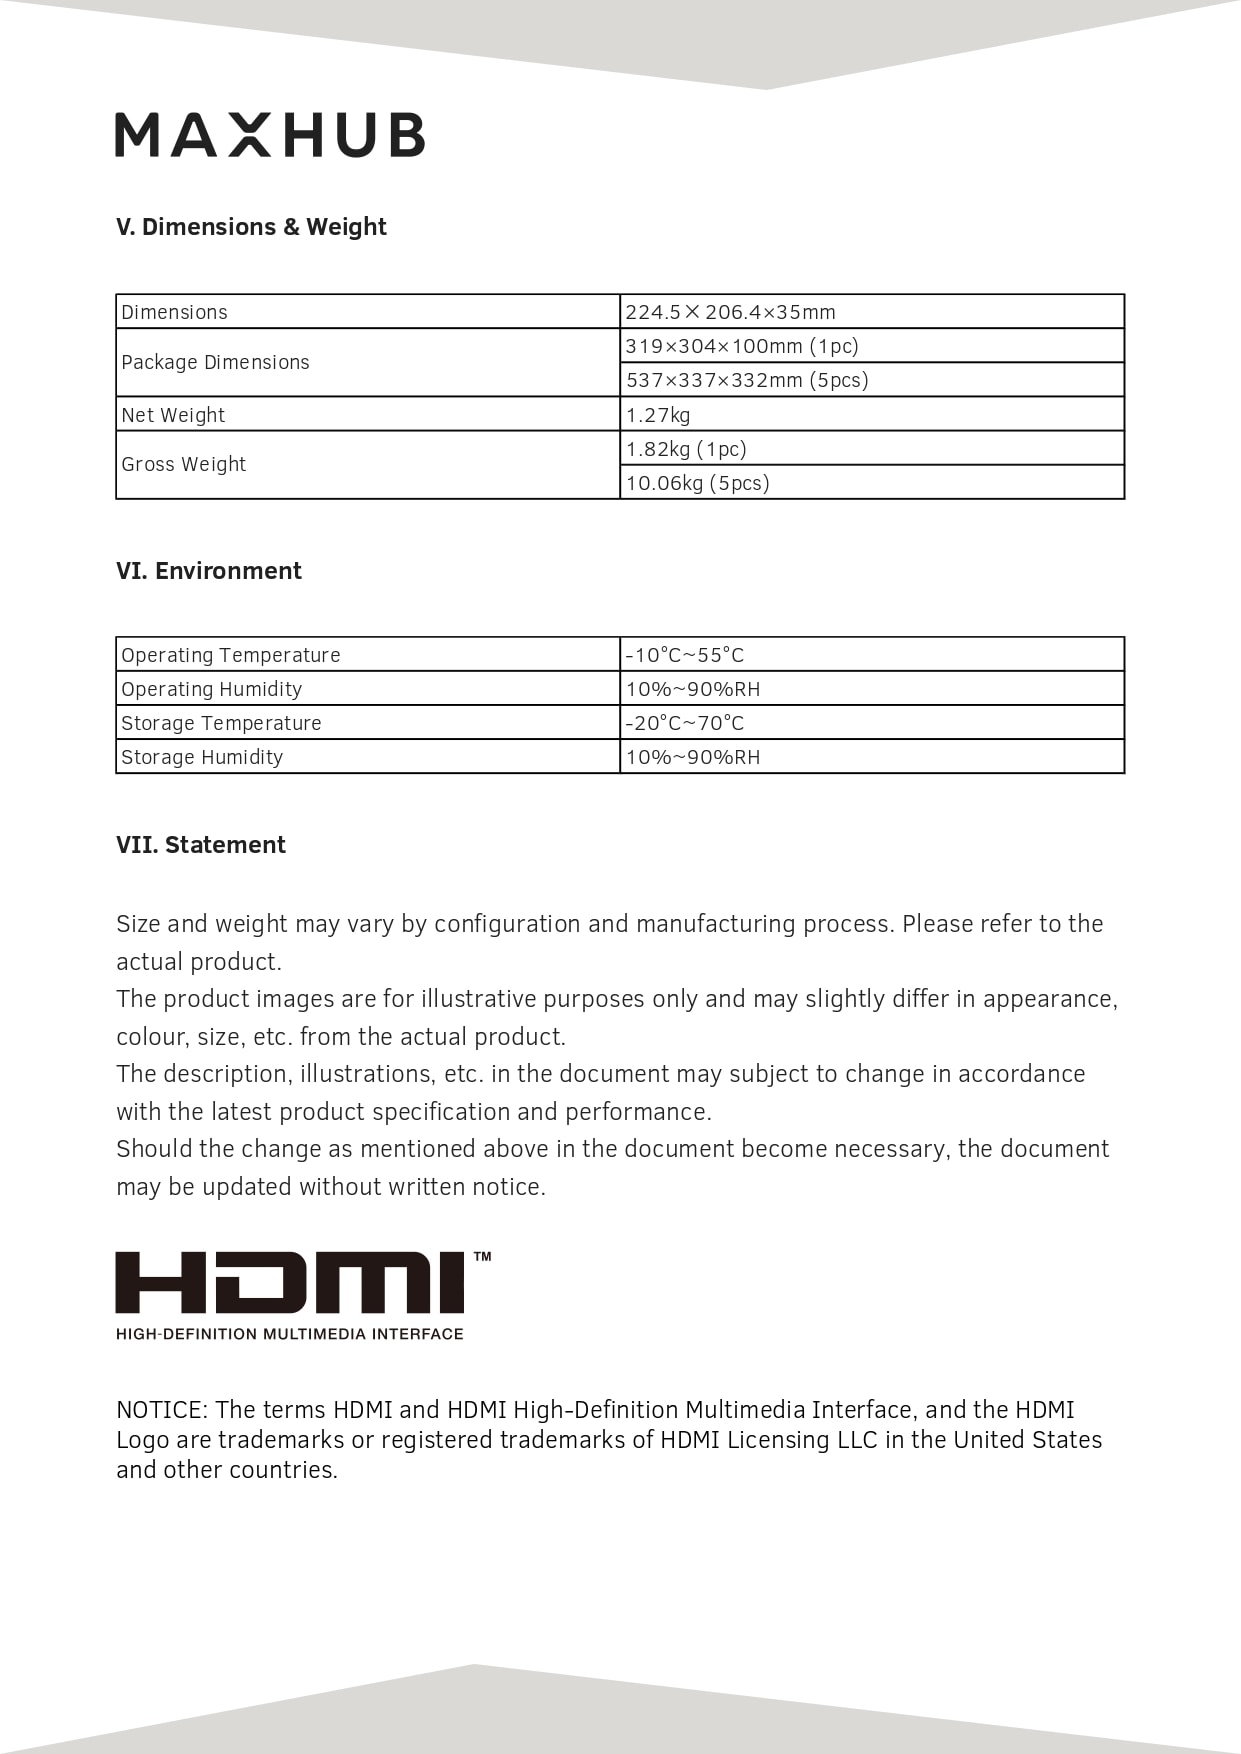 Maxhub Pc Module Mt51a Product Specification Tanphatvn.com Page 0003